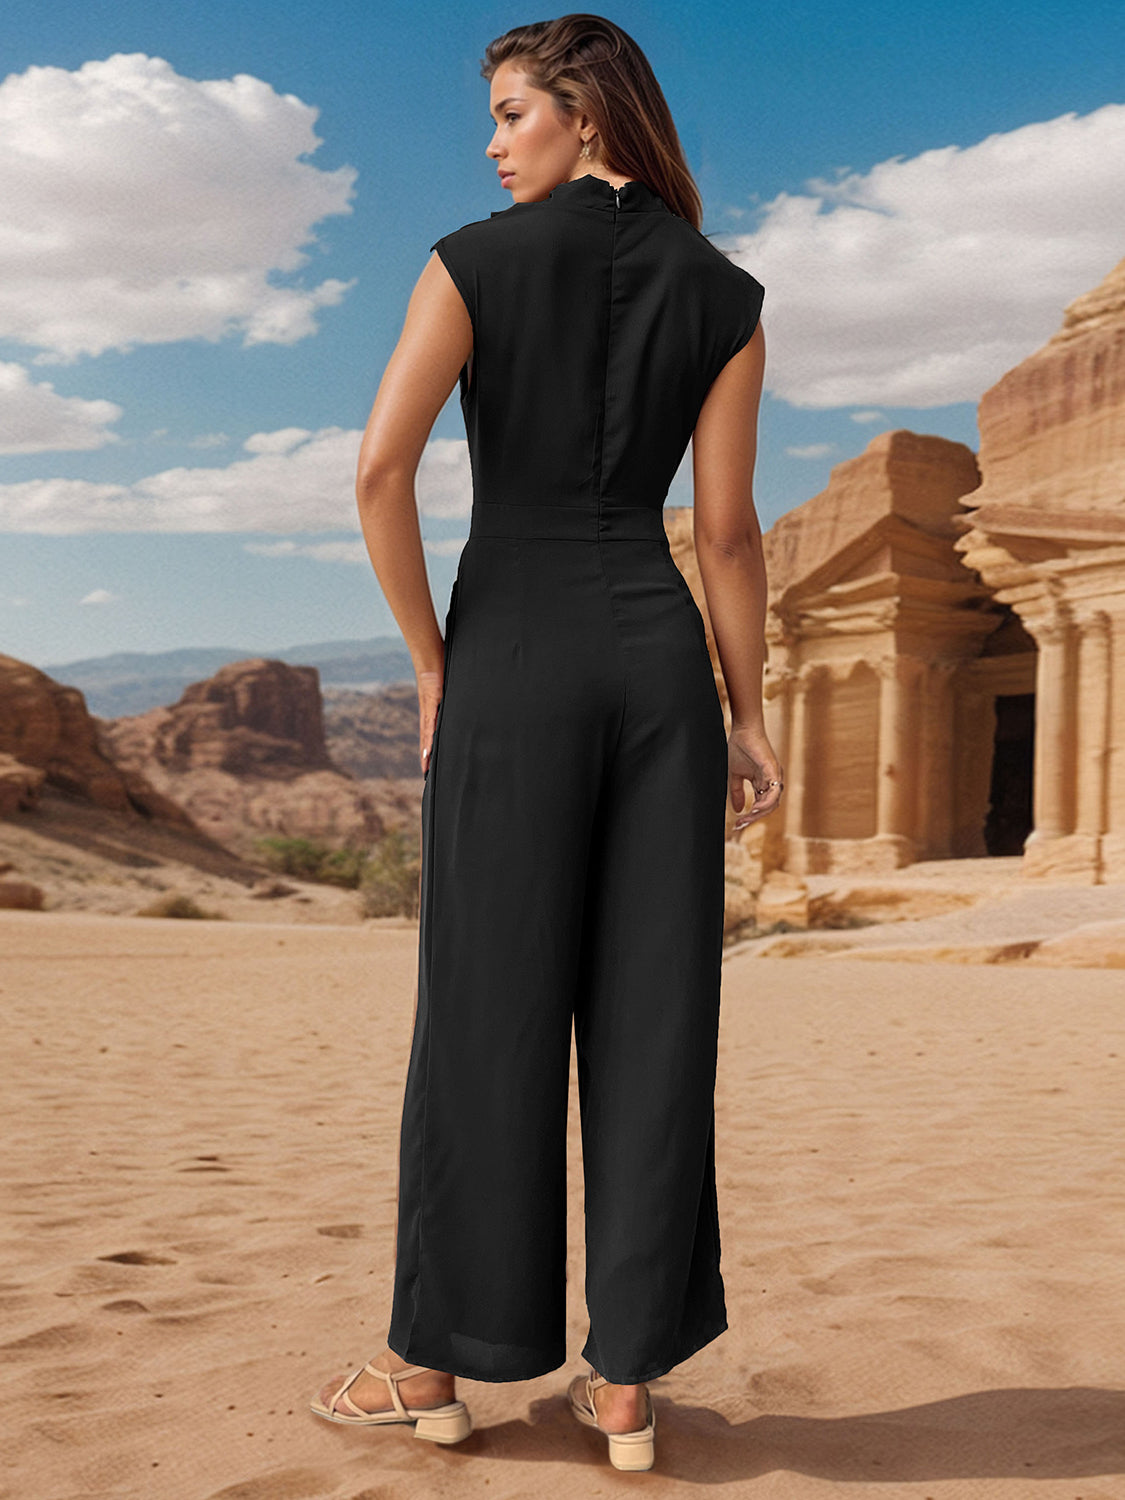 Ruched Mock Neck Sleeveless Jumpsuit New women's fashion pants romper